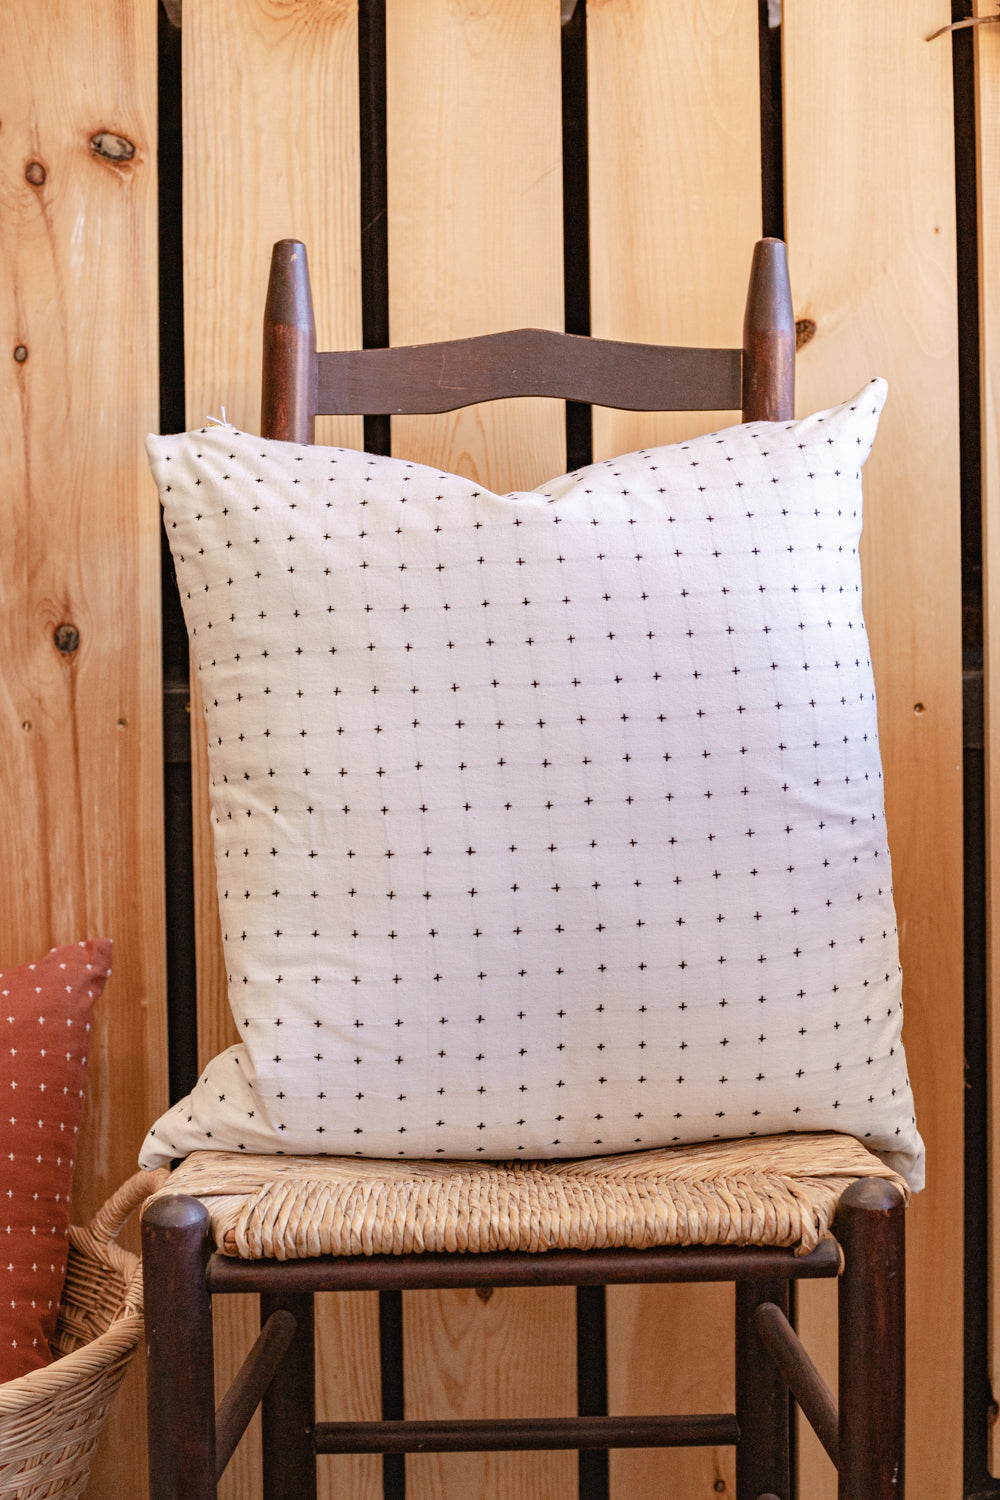 Hand-embroidered cotton square throw pillows in bone white color on wooden chair